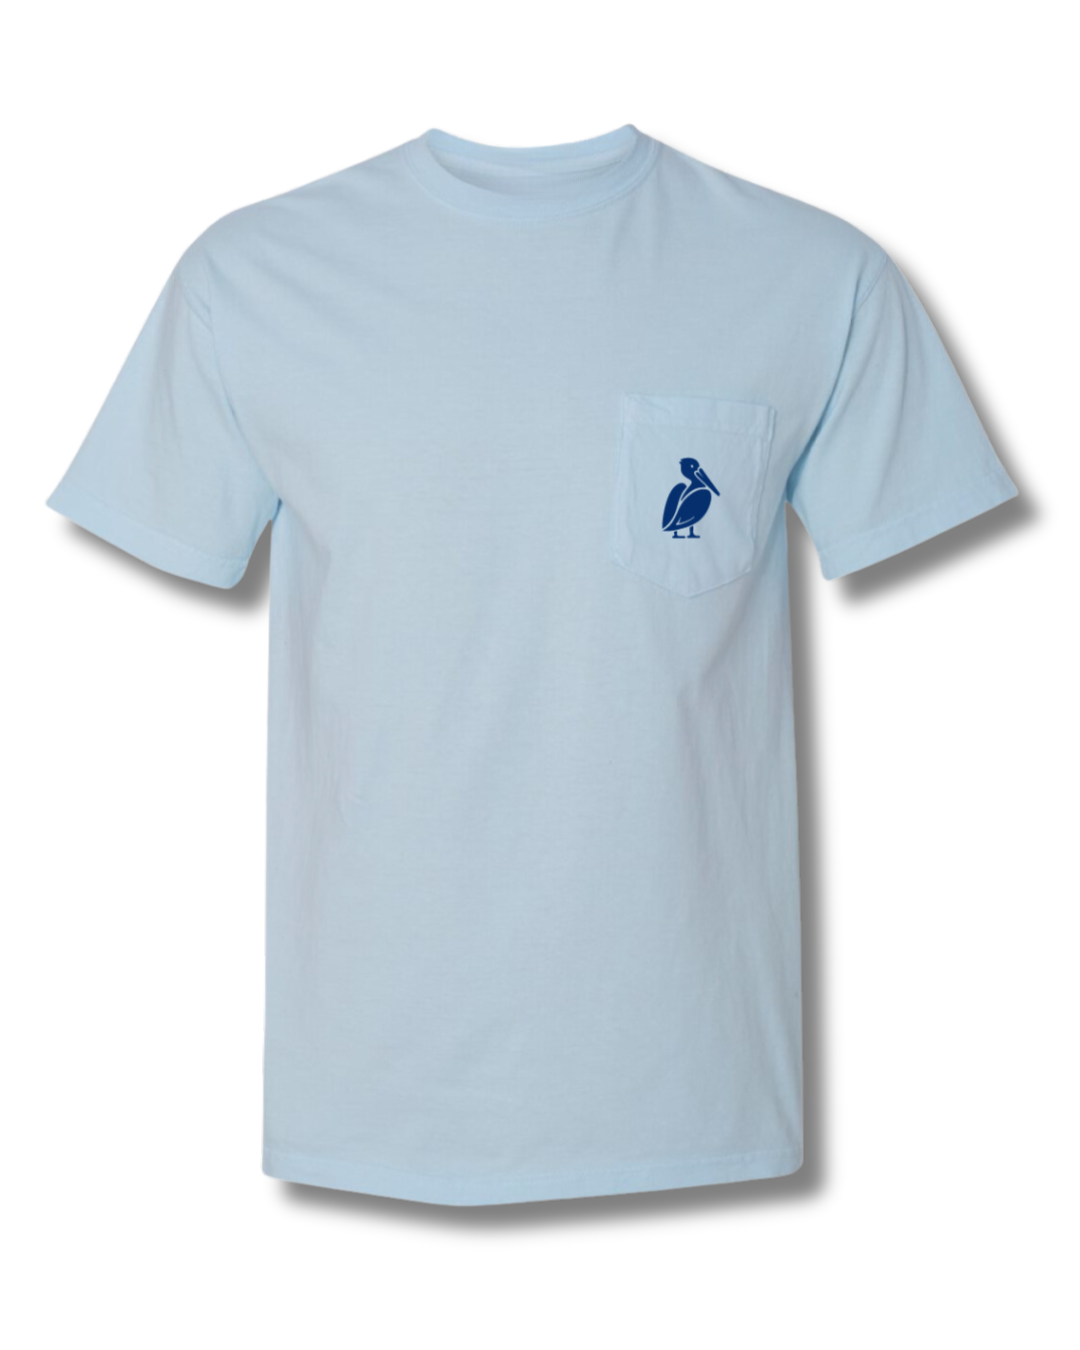 Stay Spicy Pocket T-shirt